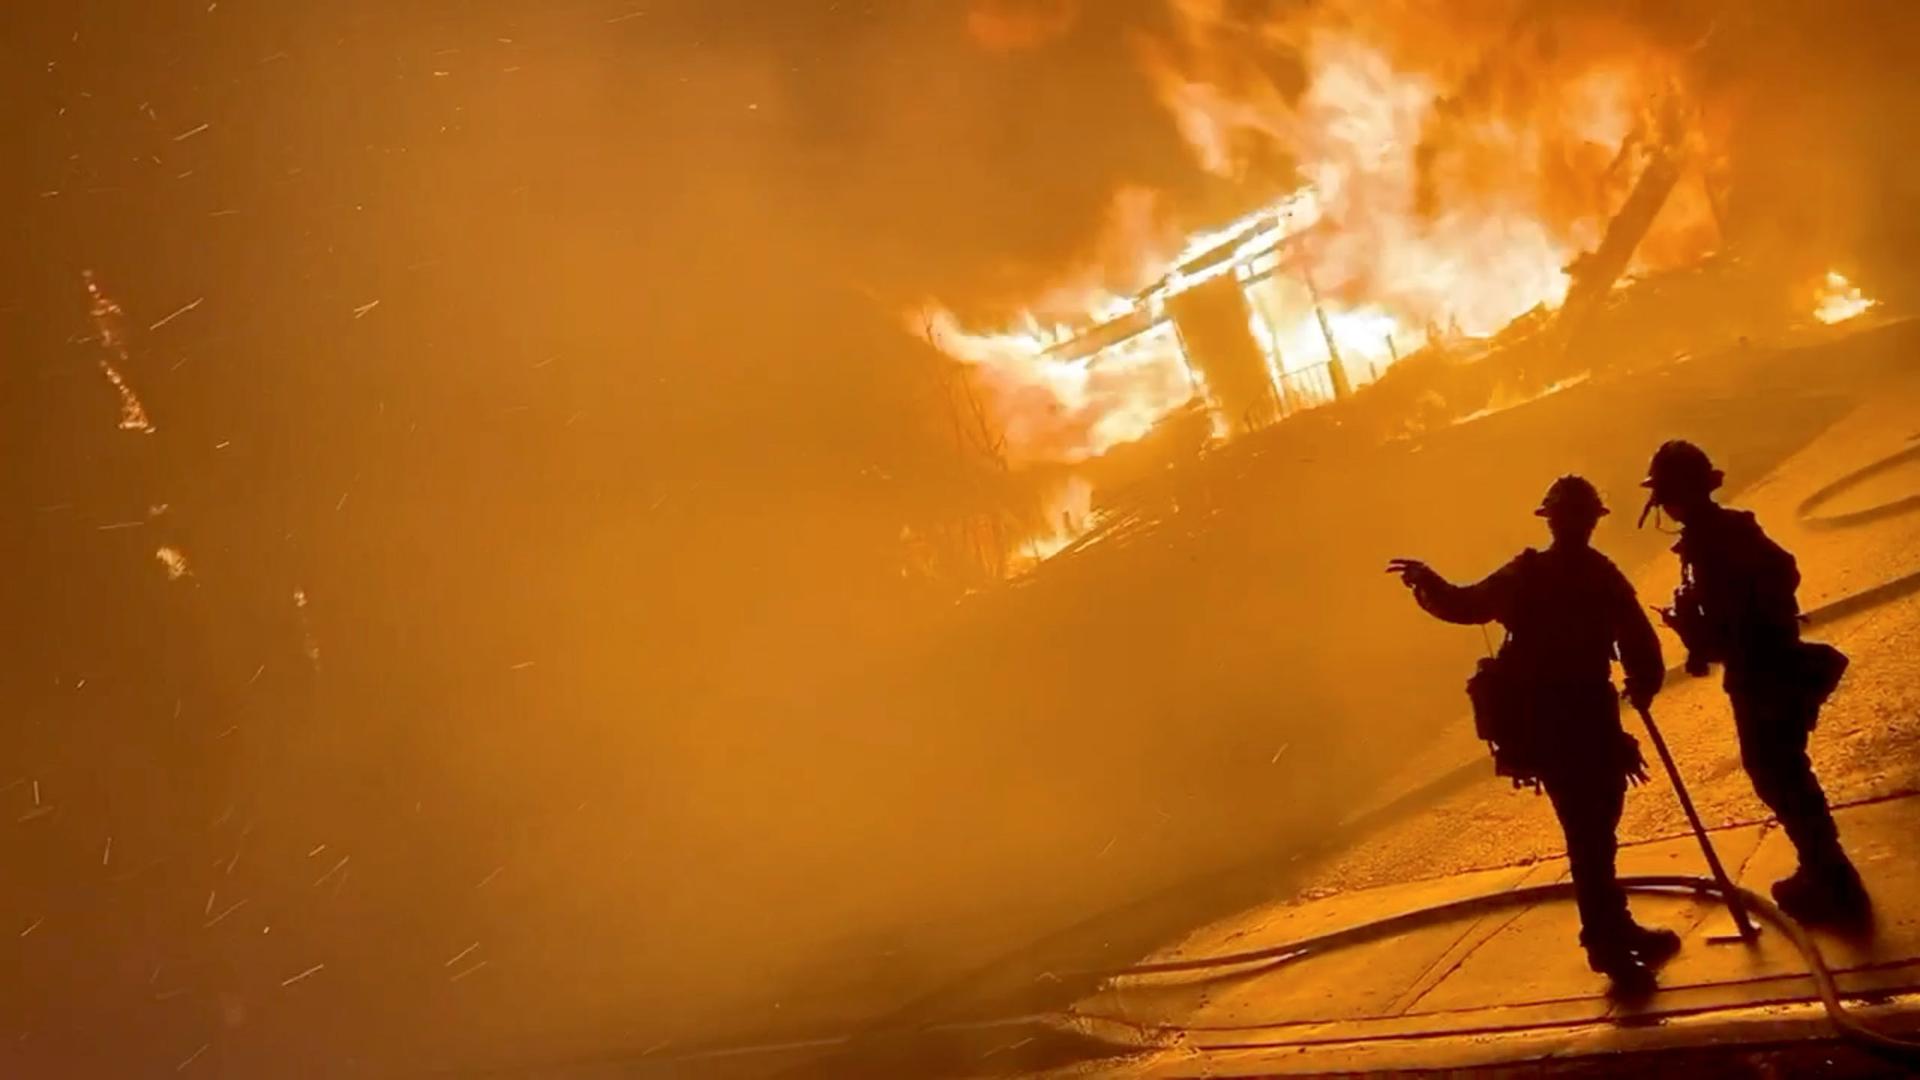 A firefighter gestures to a colleague in front of a house on fire during wildfires in San Bernardino, California, US, on Oct. 31, 2019 in this screen grab obtained from a social media video.